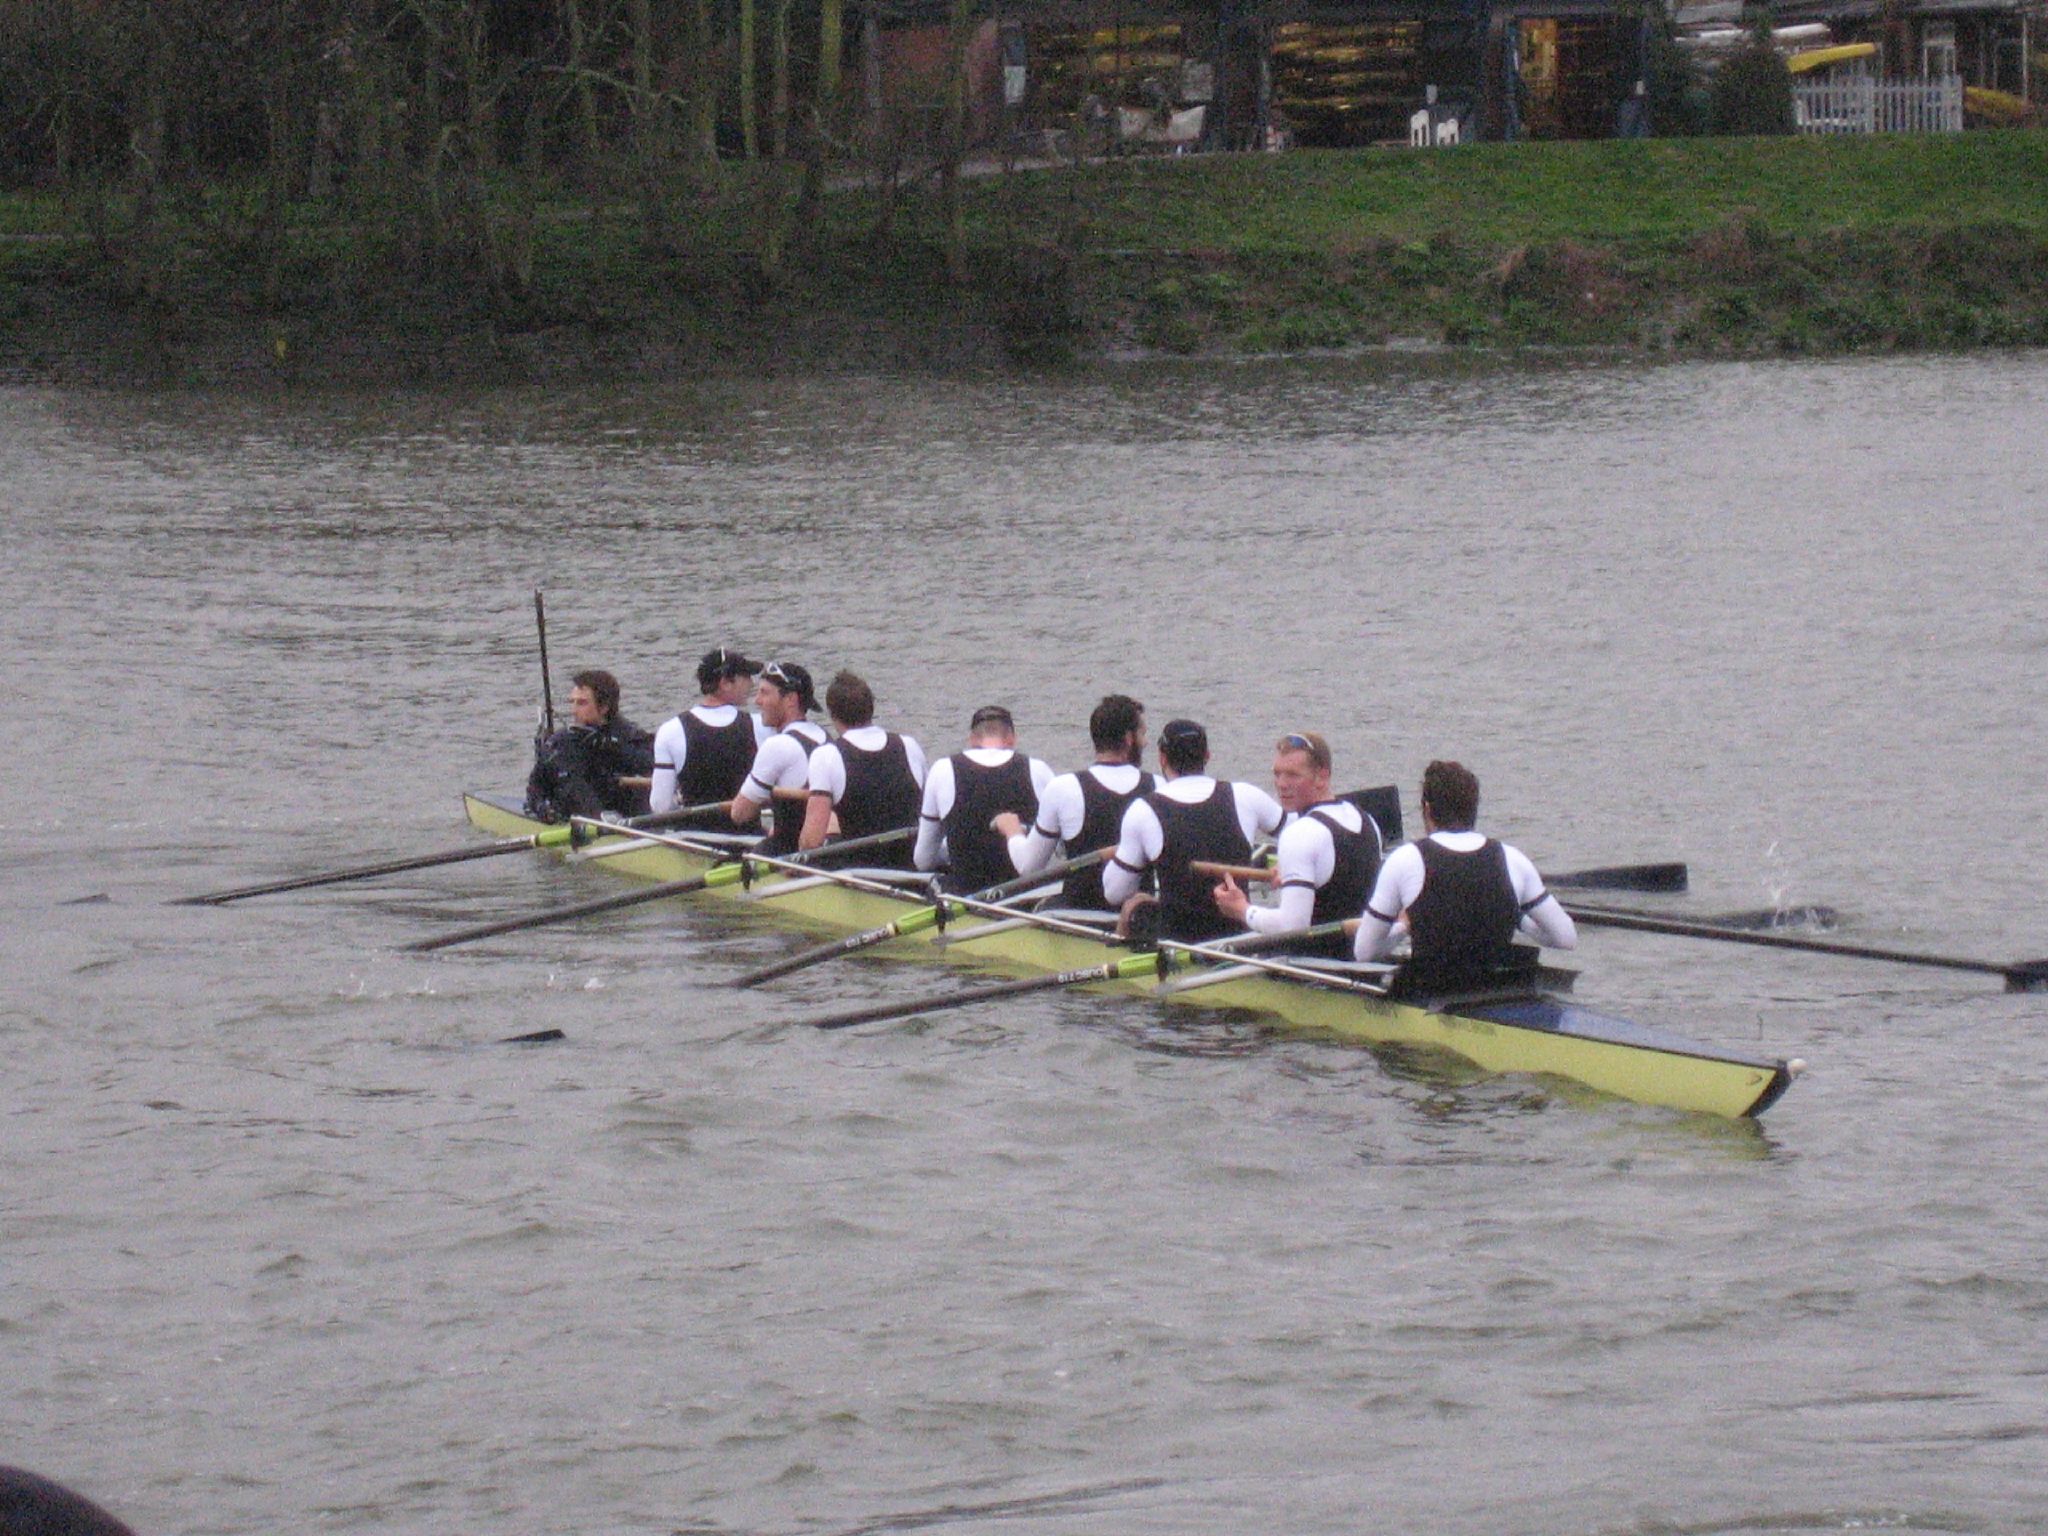 eight rowers in a row on a lake